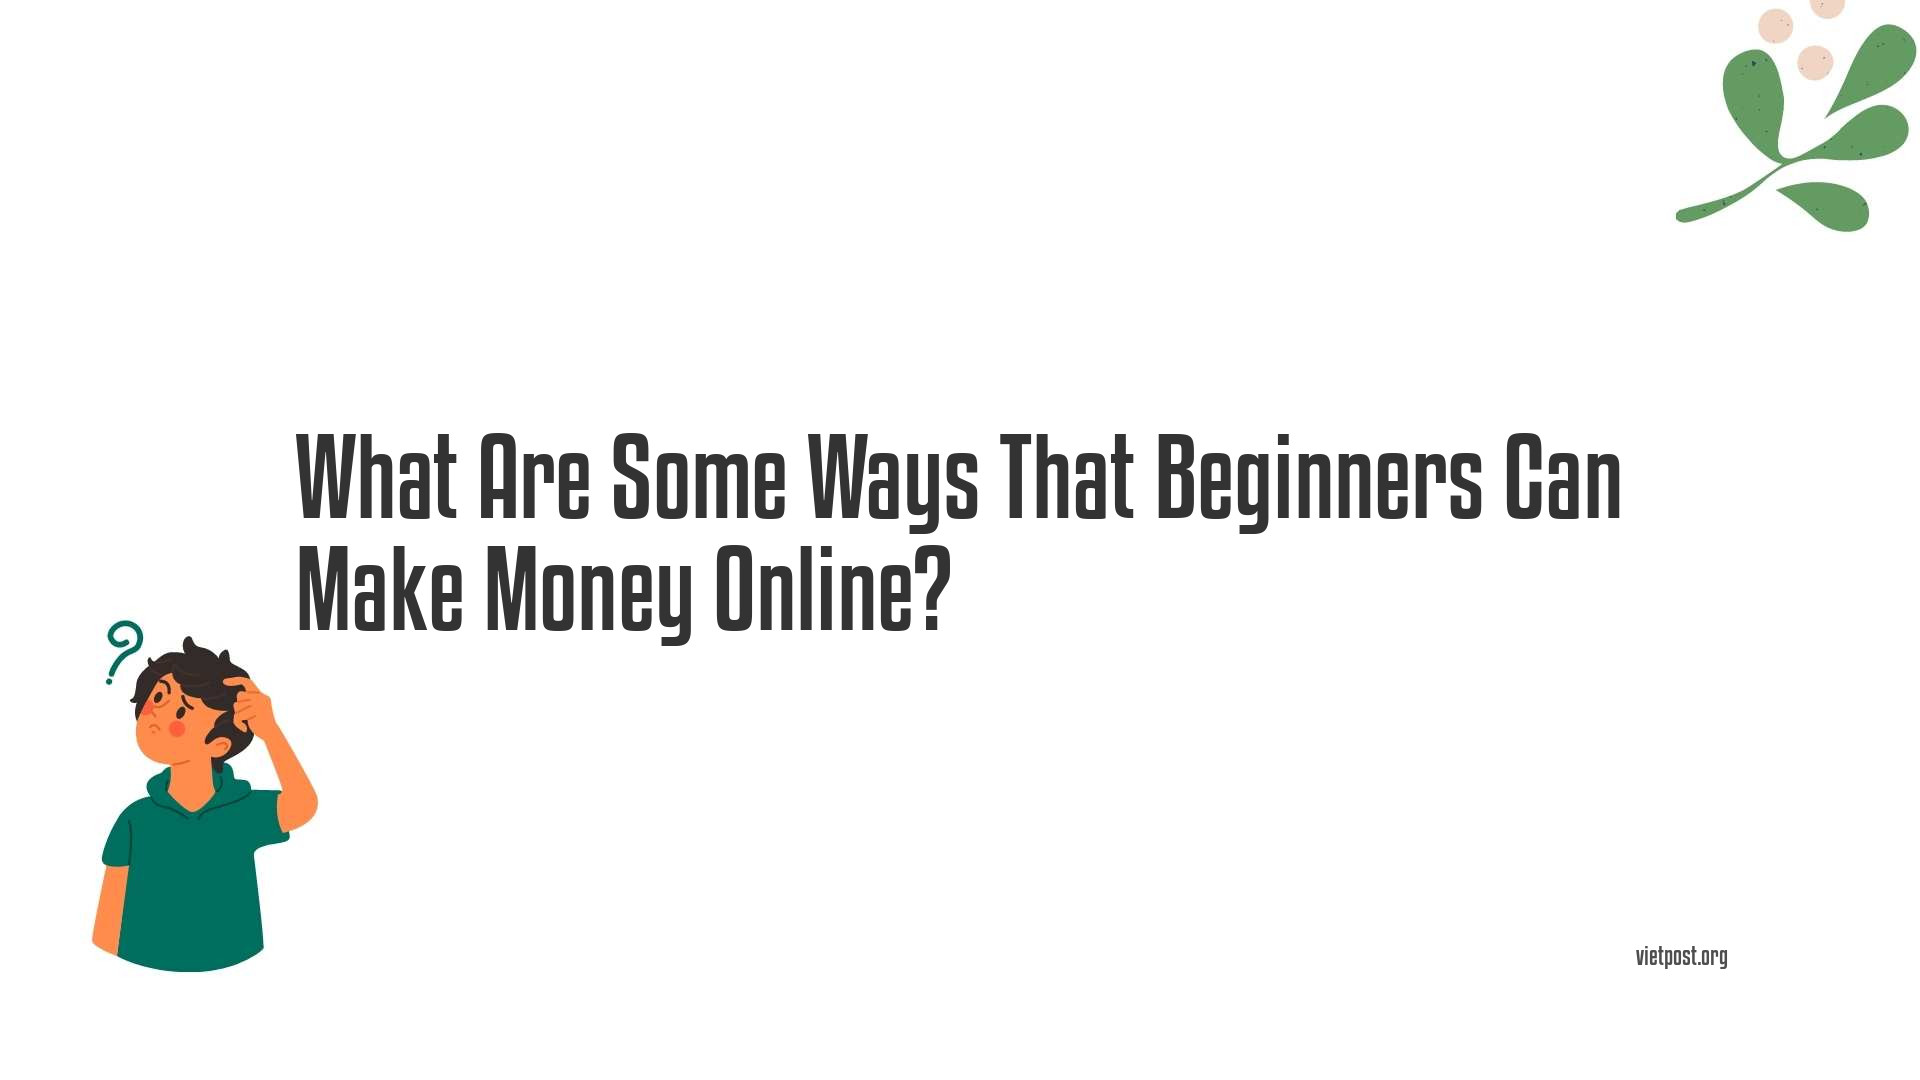 What Are Some Ways That Beginners Can Make Money Online?